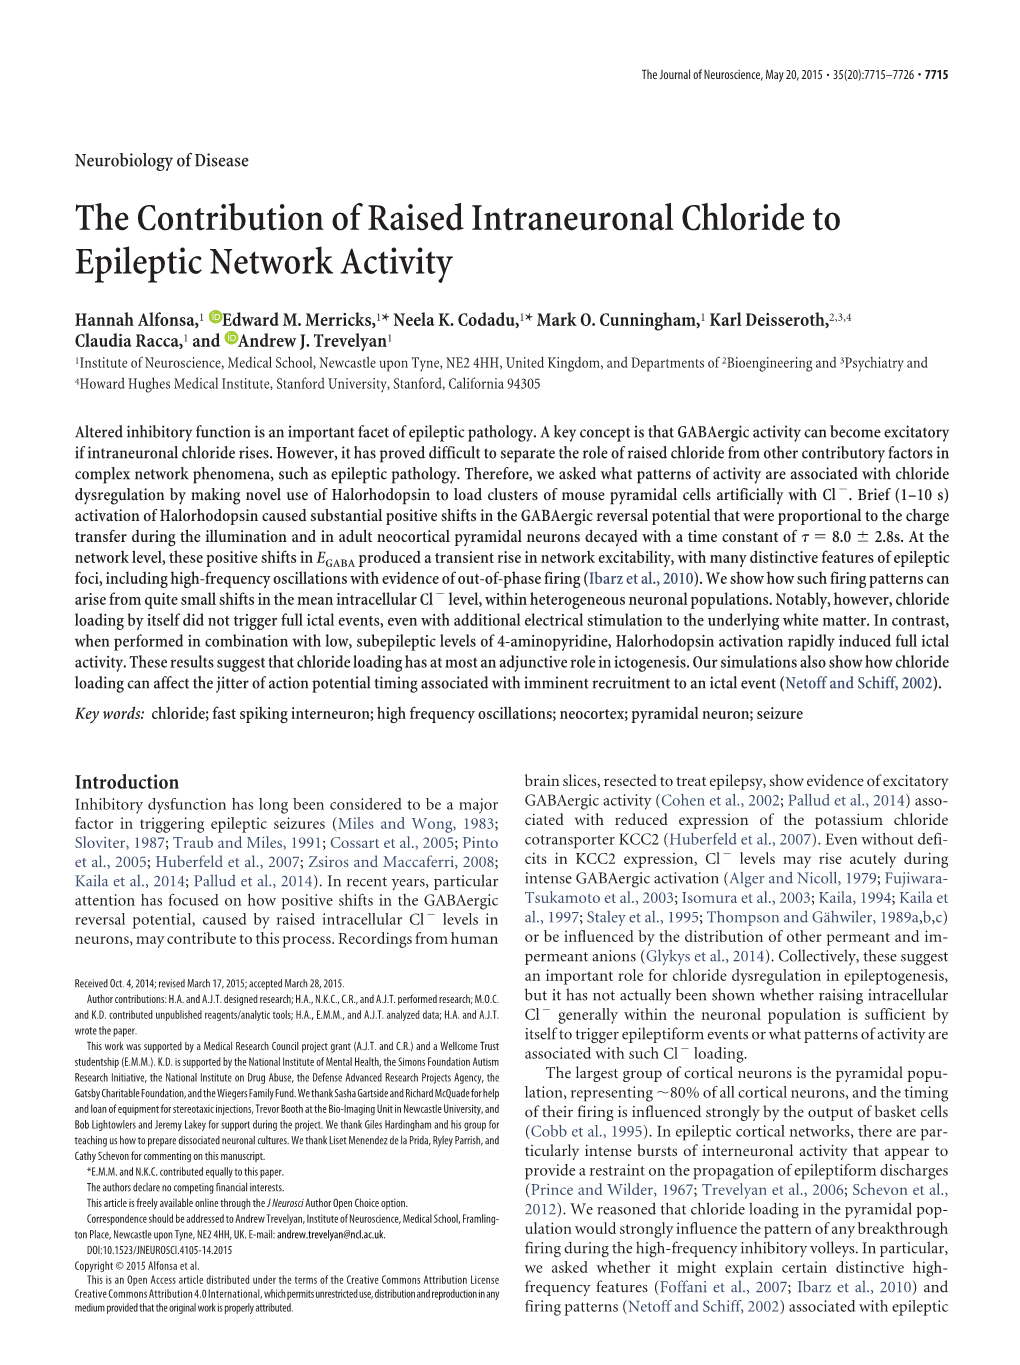 The Contribution of Raised Intraneuronal Chloride to Epileptic Network Activity